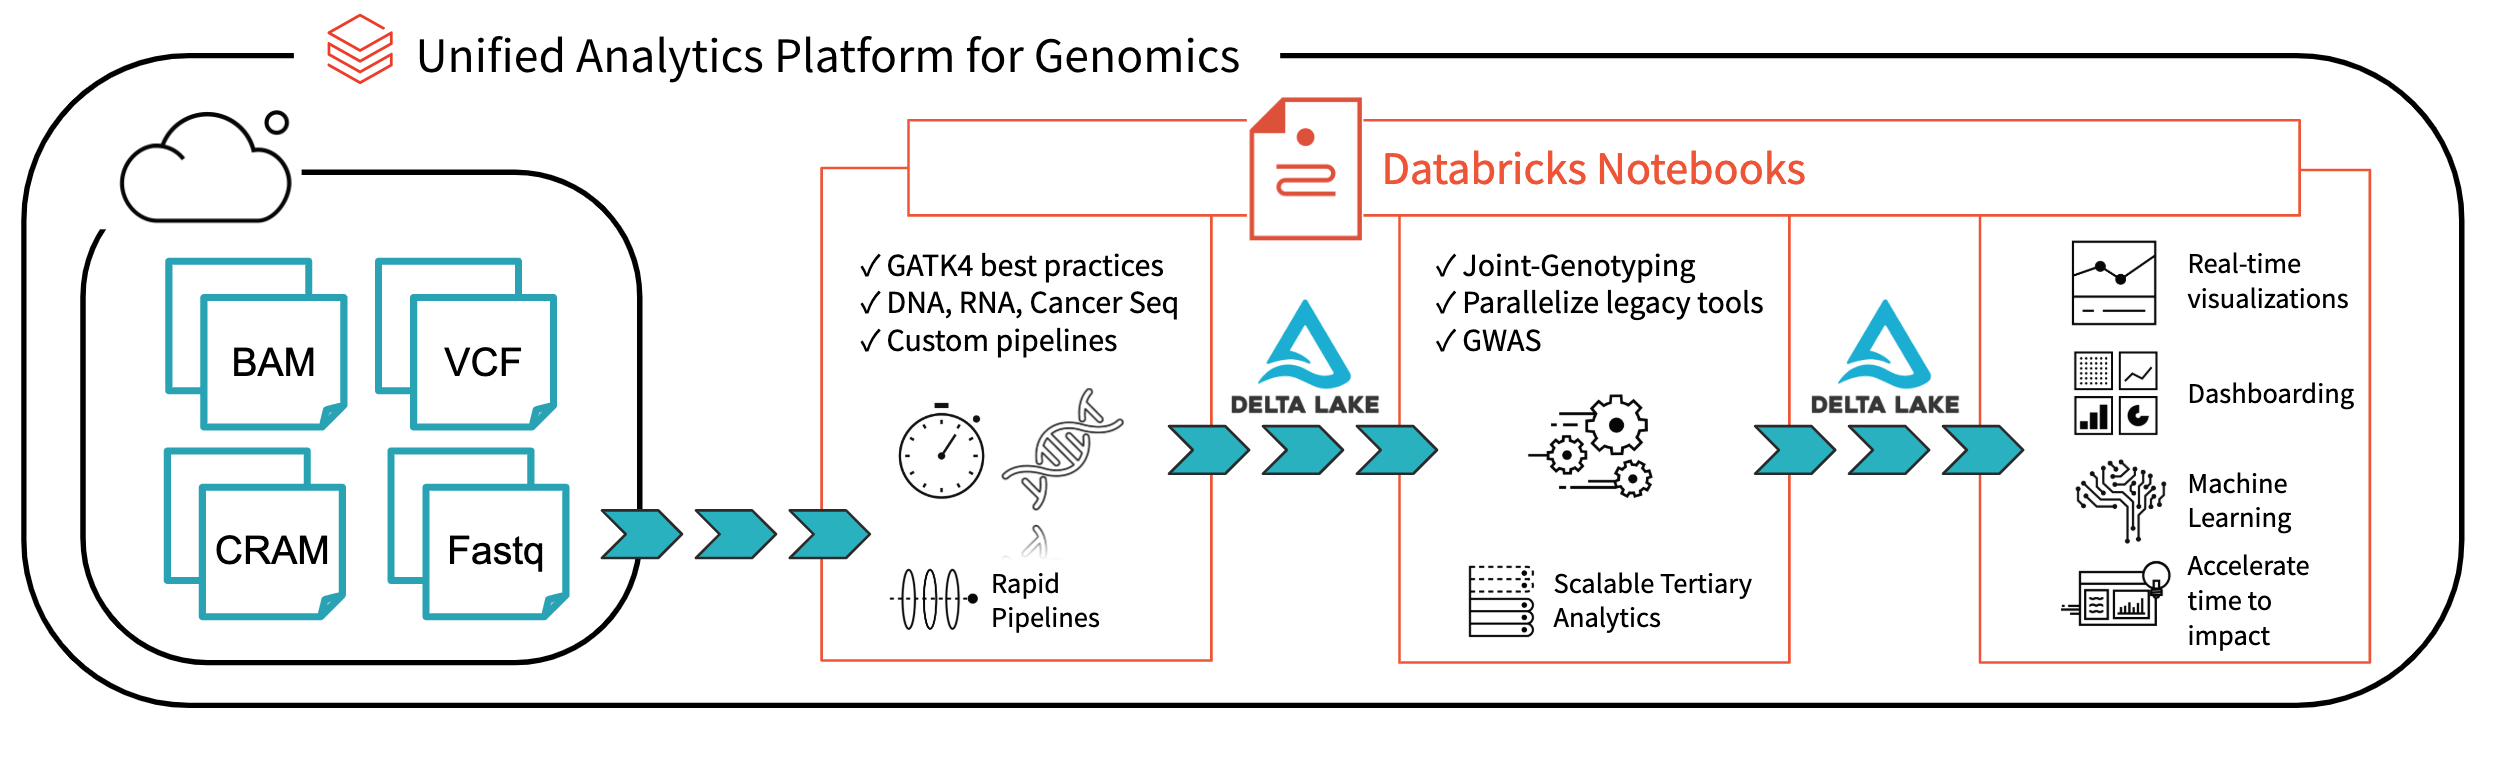 Scaling Genomic Workflows With Spark Sql Bgen And Vcf Readers The